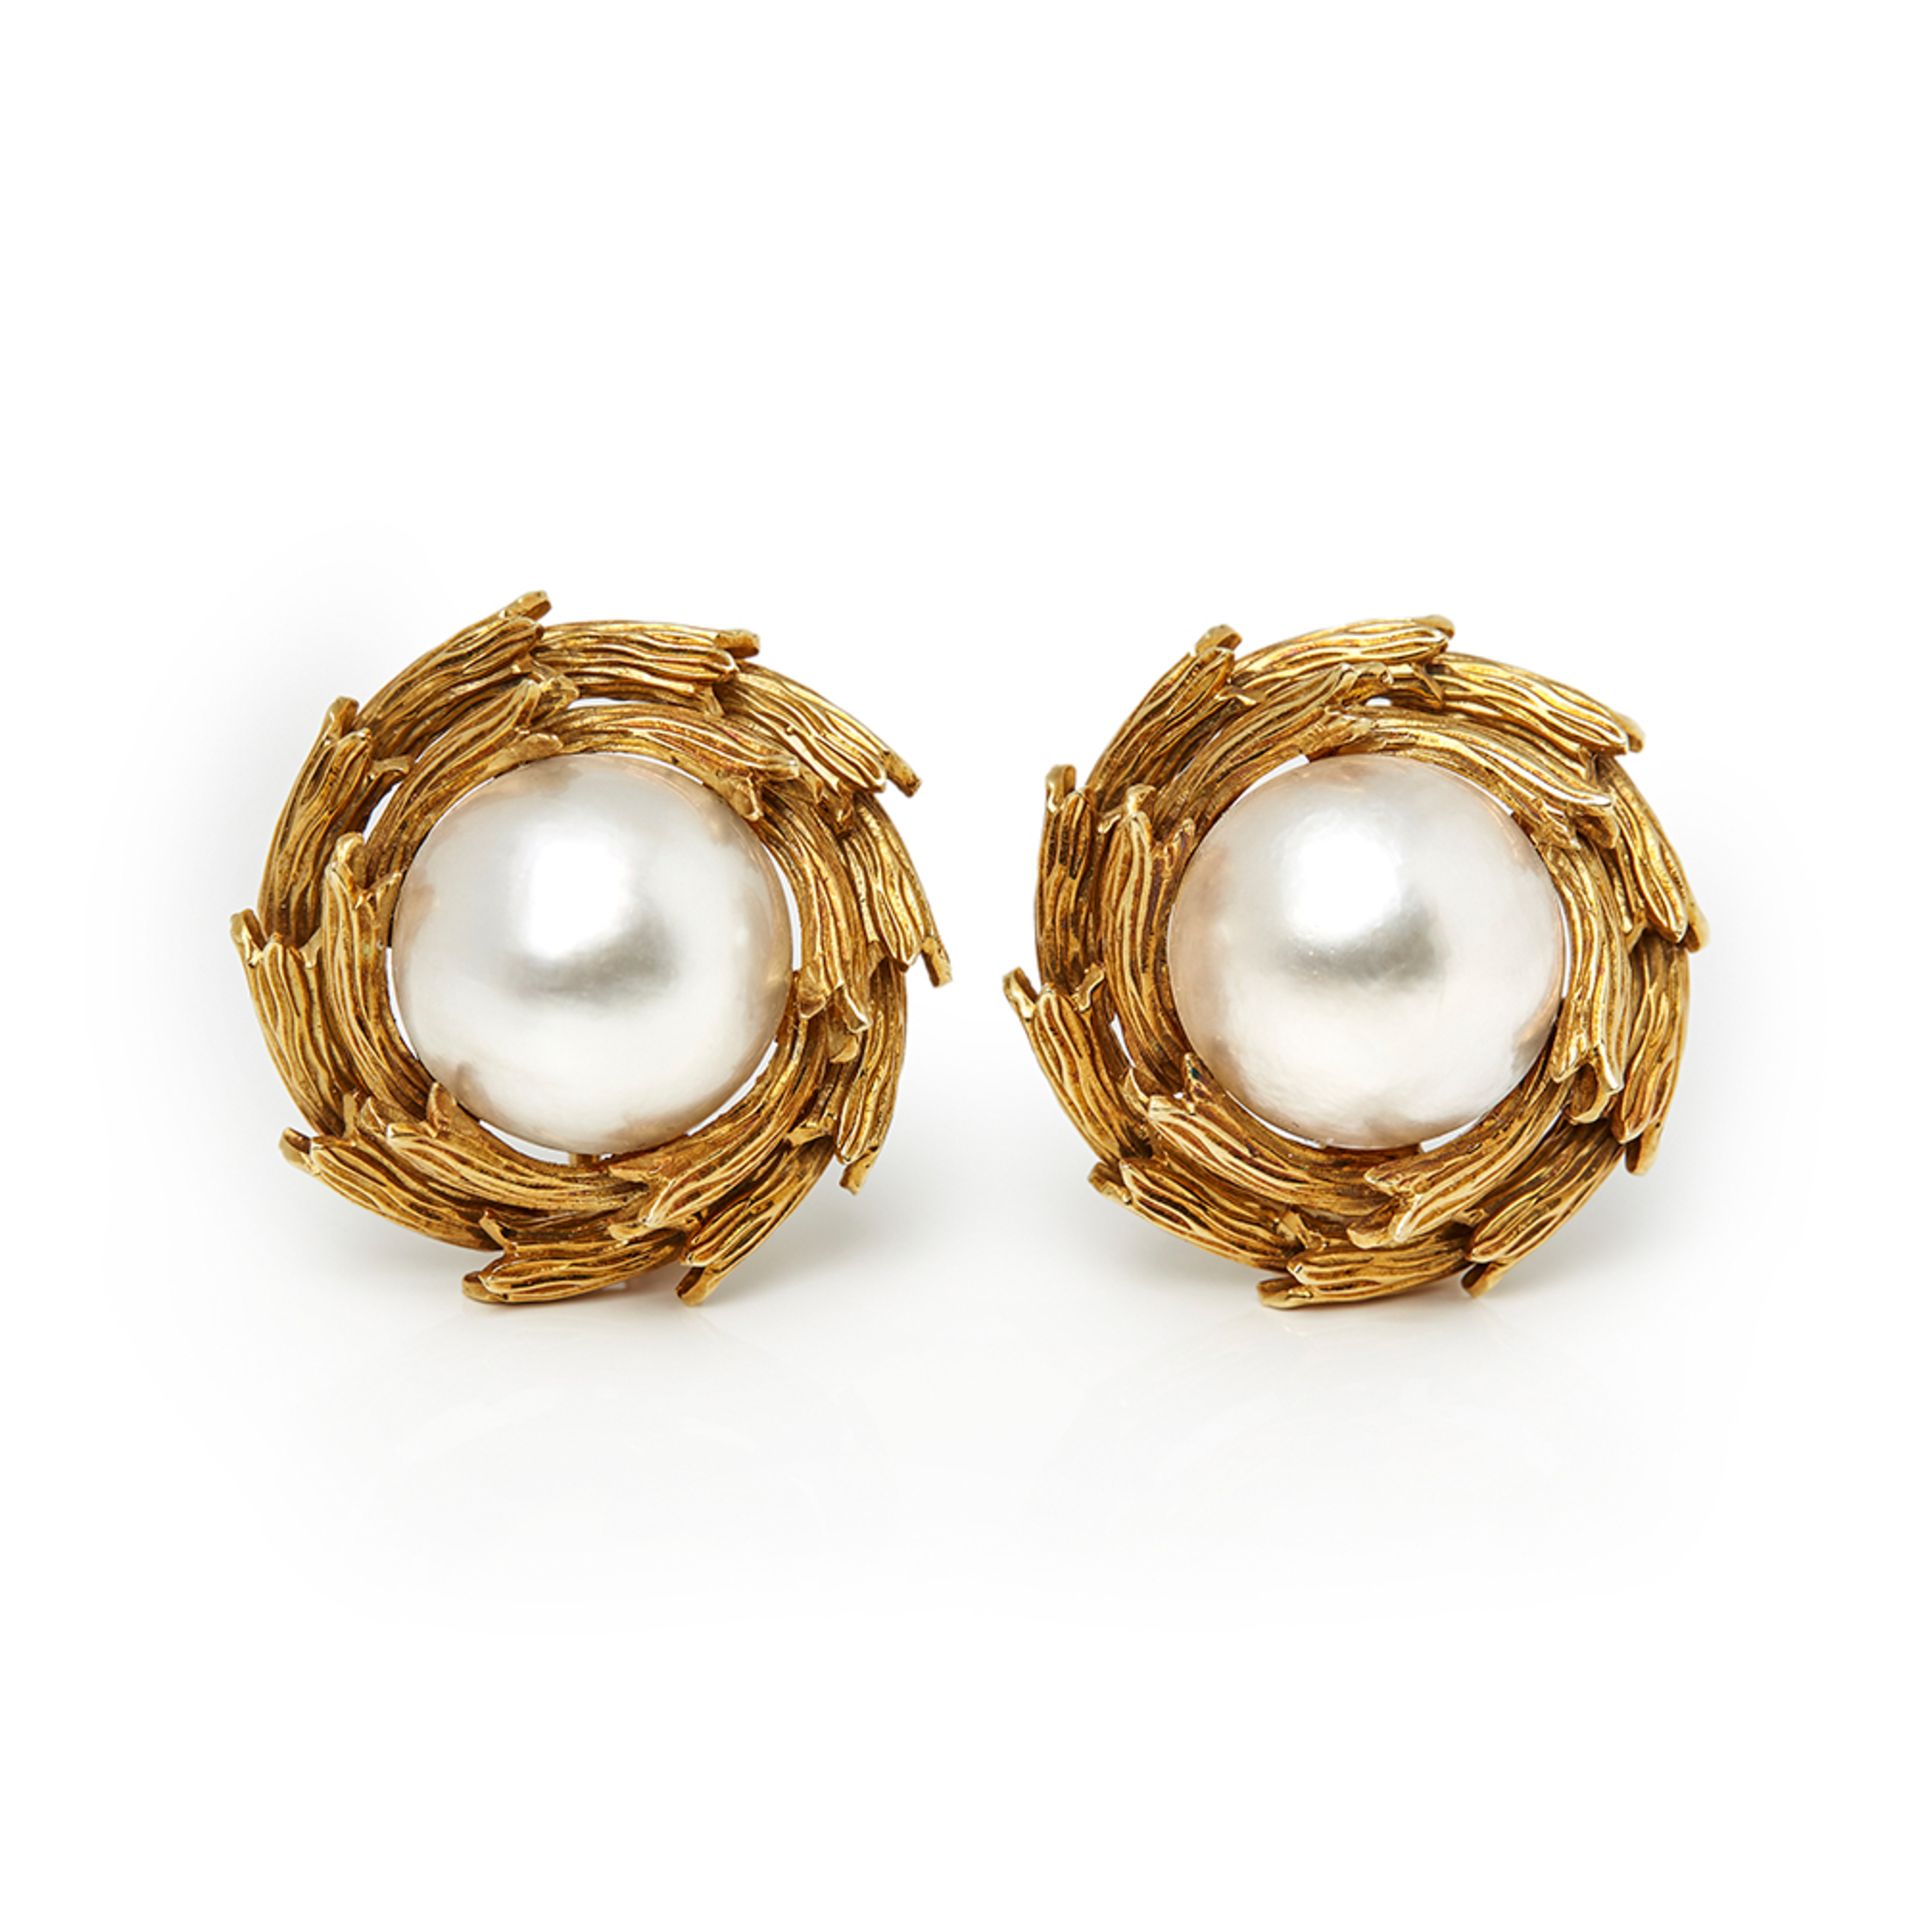 Tiffany & Co. 18k Yellow Gold Mabe Pearl Earrings